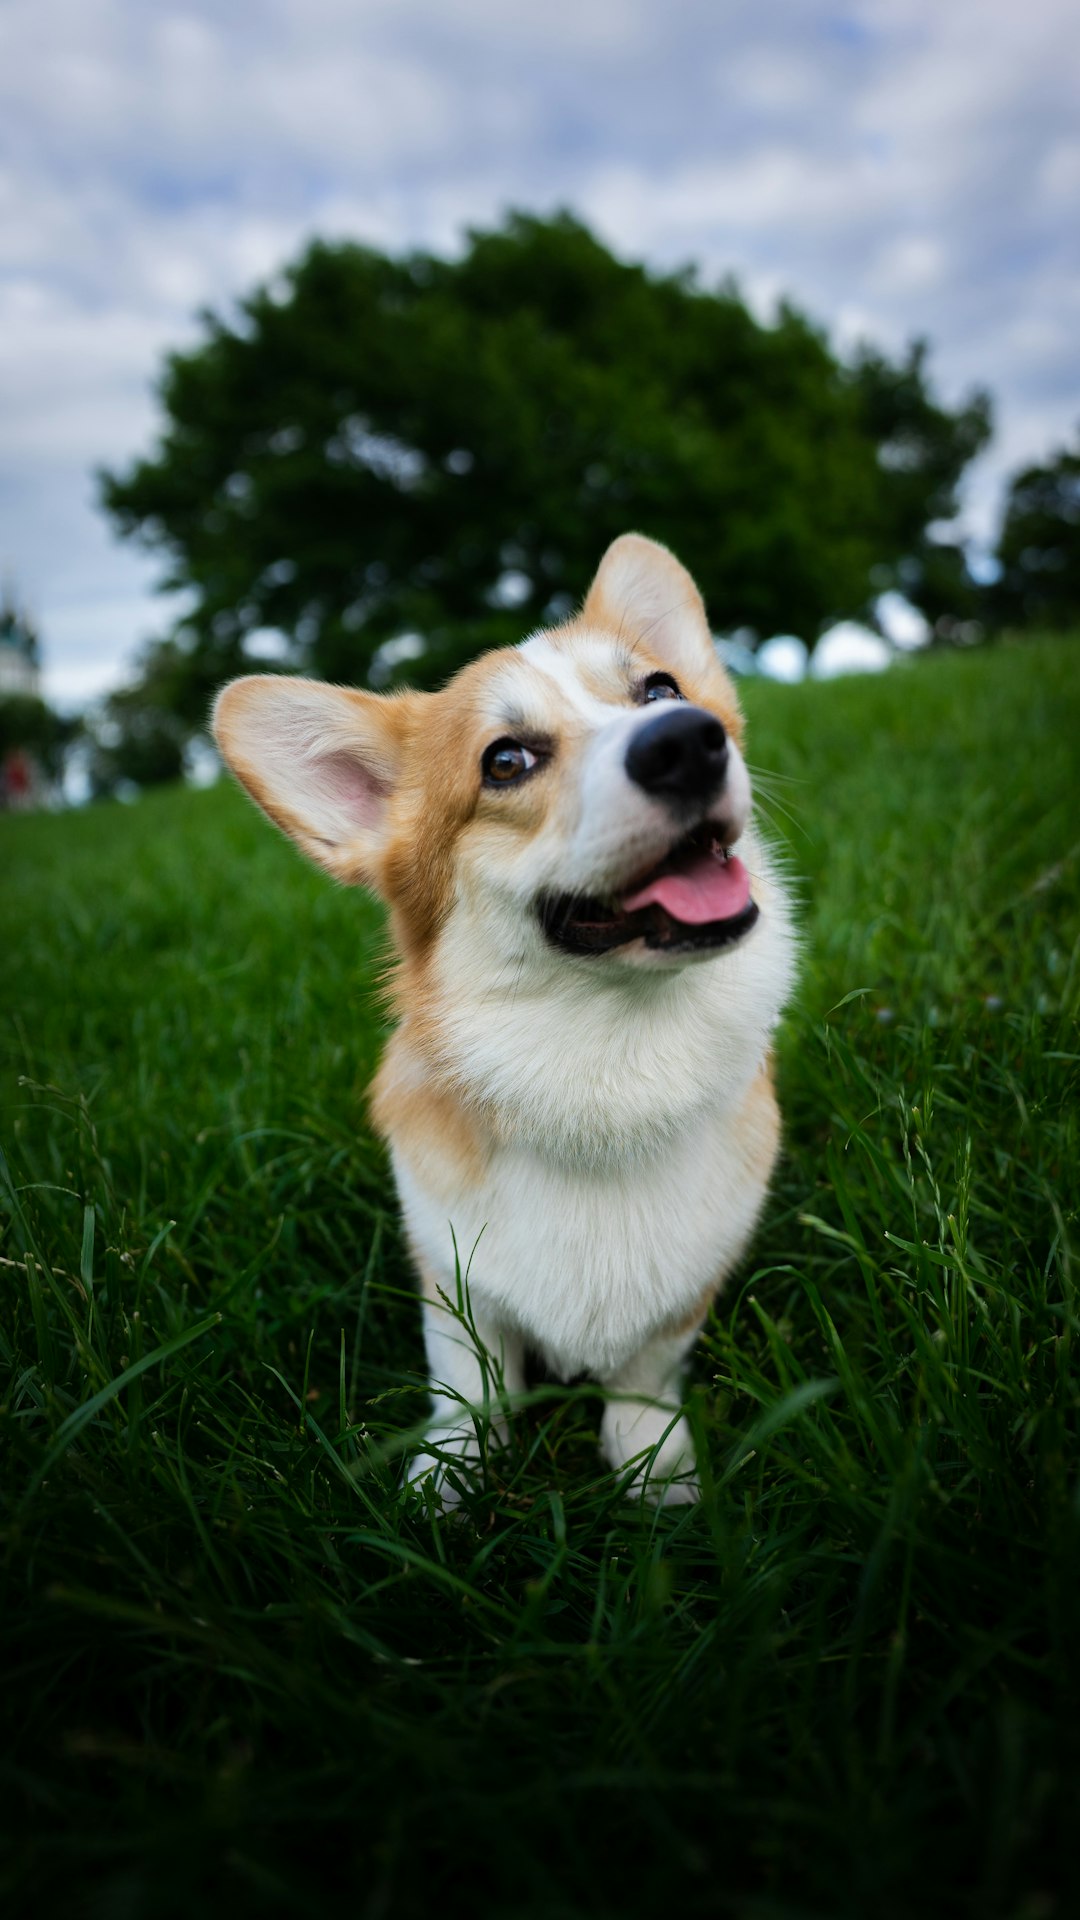 brown and white corgi puppy on green grass field during daytime